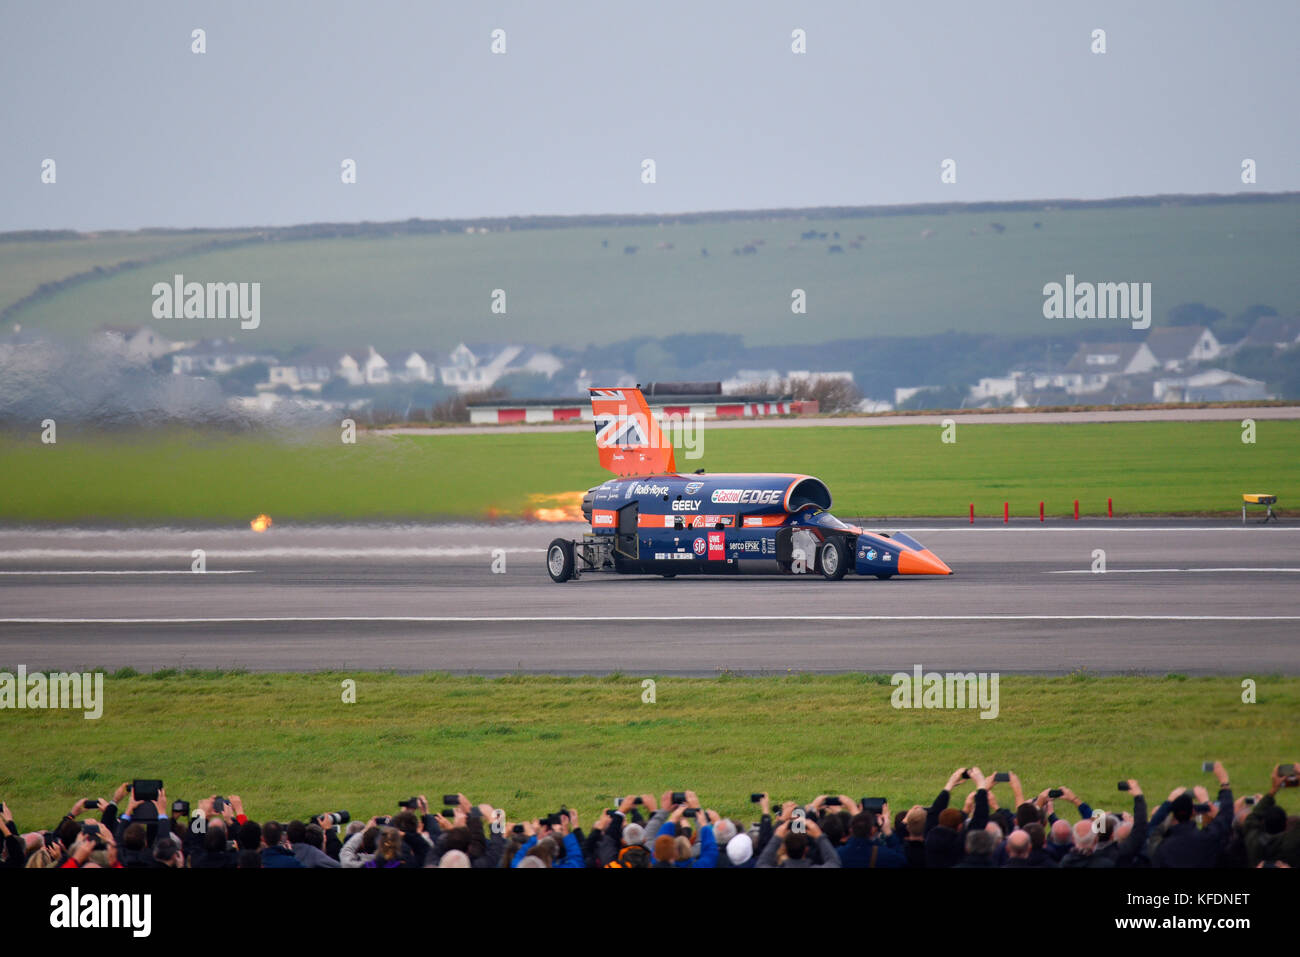 Bloodhound SSC supersonic car at speed with re-heat afterburner engaged from the Eurojet EJ200 jet engine during trials at Cornwall Airport Newquay Stock Photo